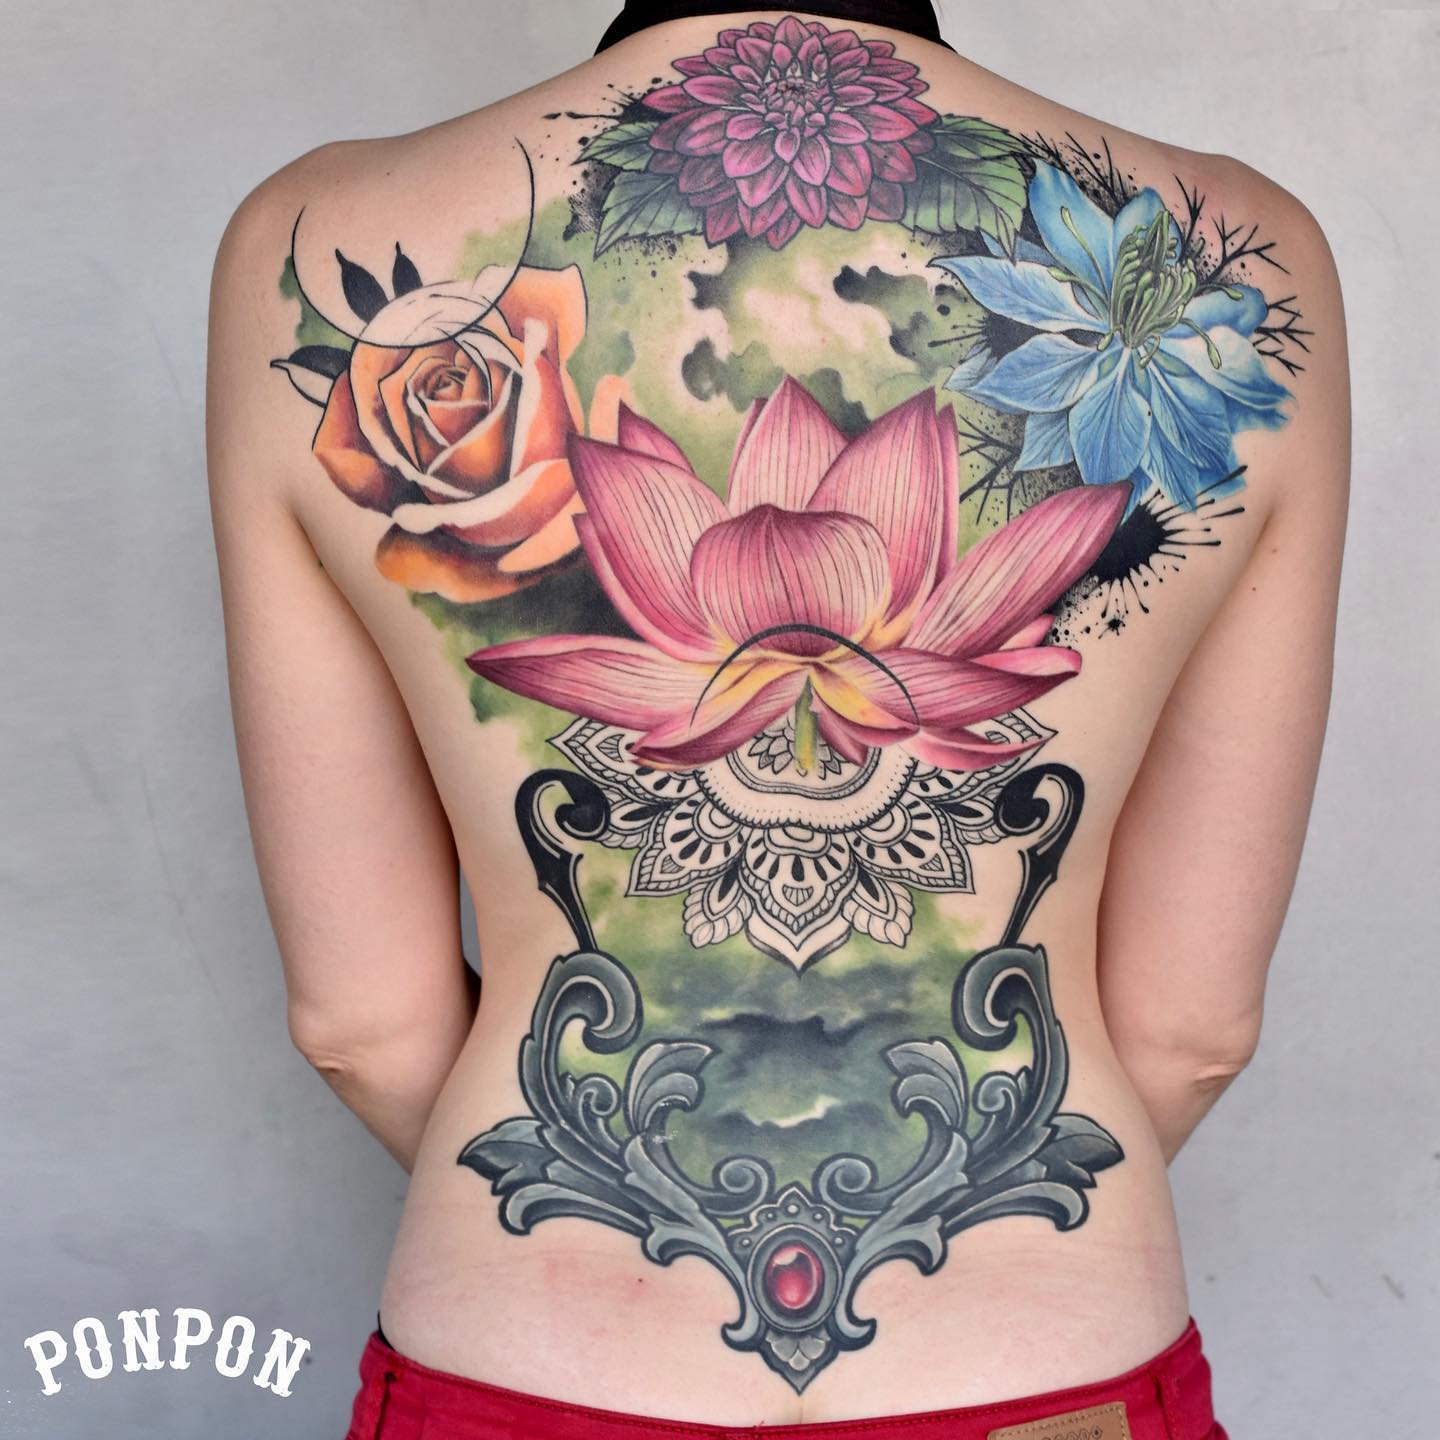 Loud flower ideas over your back can symbolize a ton of different things. Make sure that your budget is not limited when it comes to this design since it is a time-consuming yet pricey option to go for.